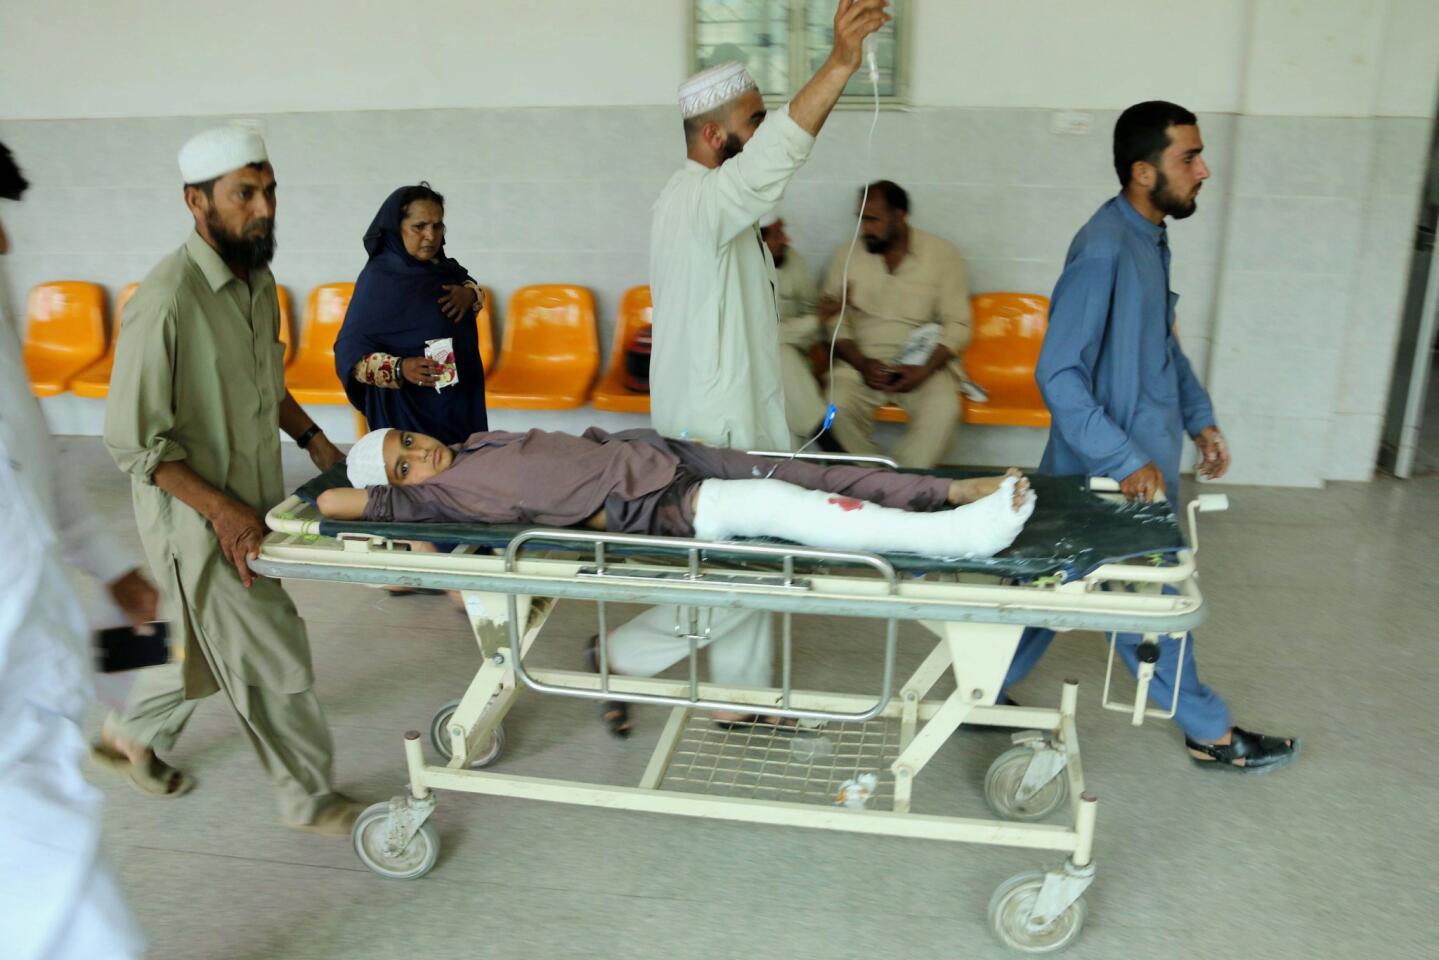 epa05252618 A man who was injured in an earthquake receives medical treatment at a hospital in Peshawar, Pakistan, 10 April 2016. At least two people were killed and 25 injured in Peshawar following a 6.6 magnitude earthquake that was felt in Pakistan, Afghanistan and India. EPA/ARSHAD ARBAB ** Usable by LA, CT and MoD ONLY **